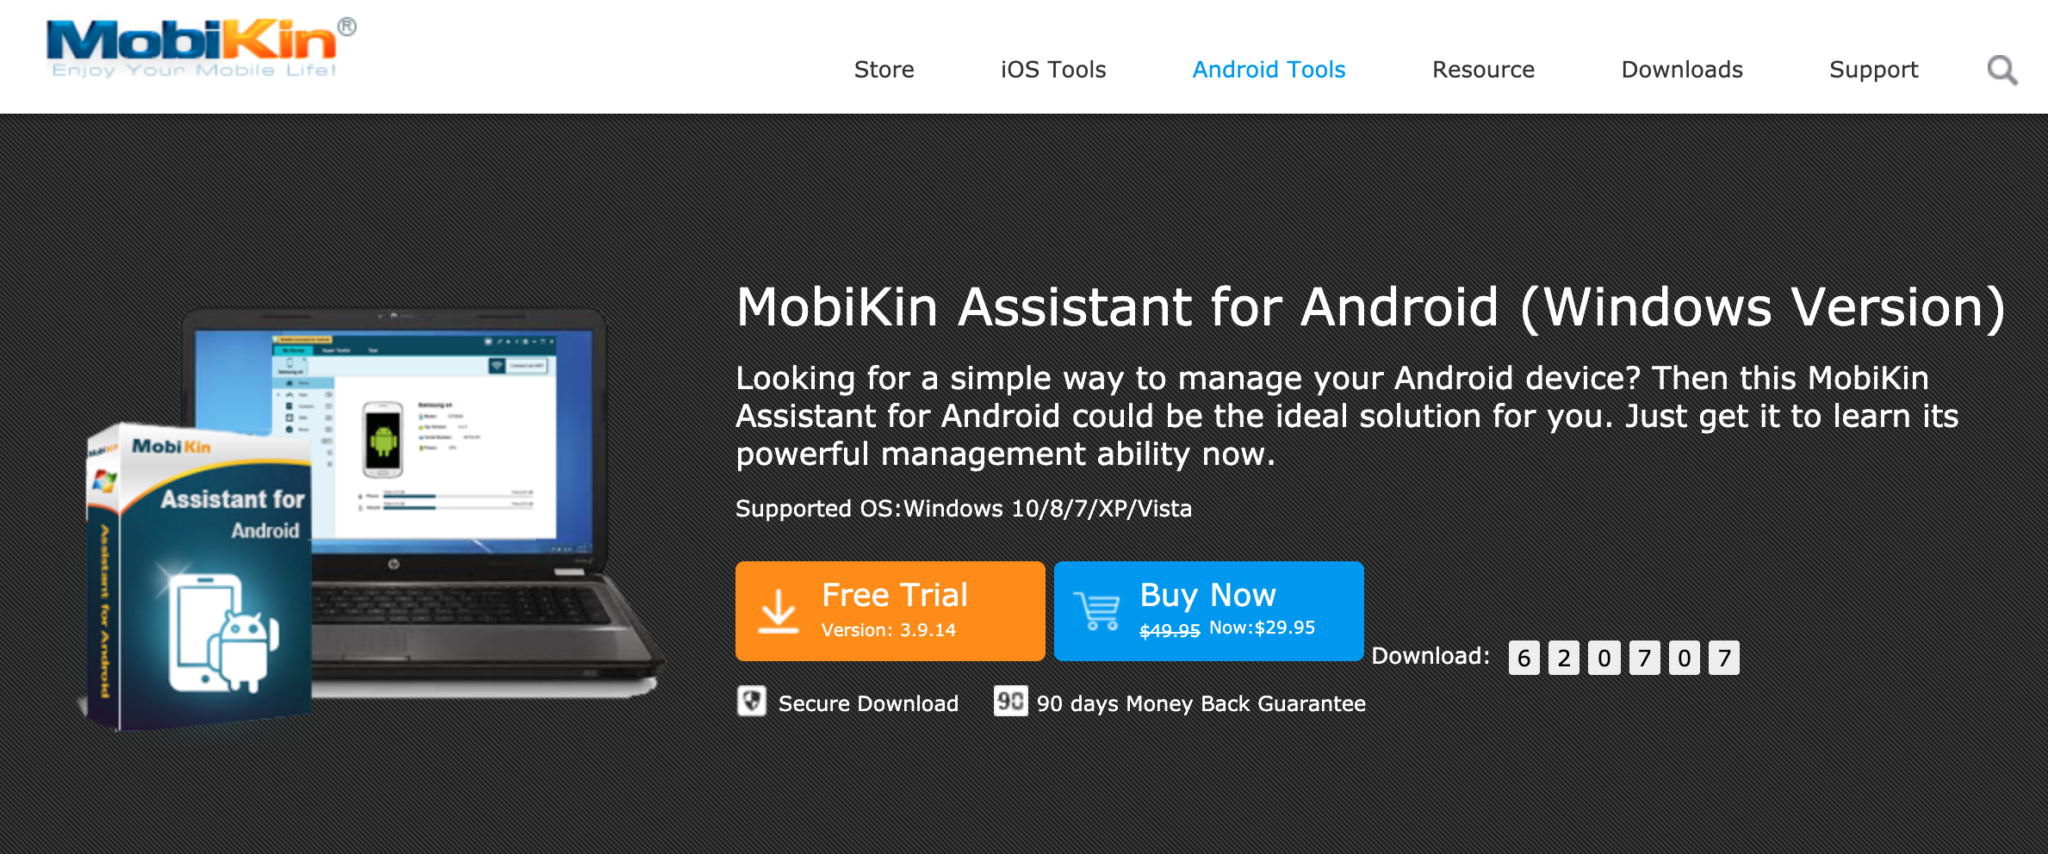 mobikin assistant for ios torrent 2.2.51